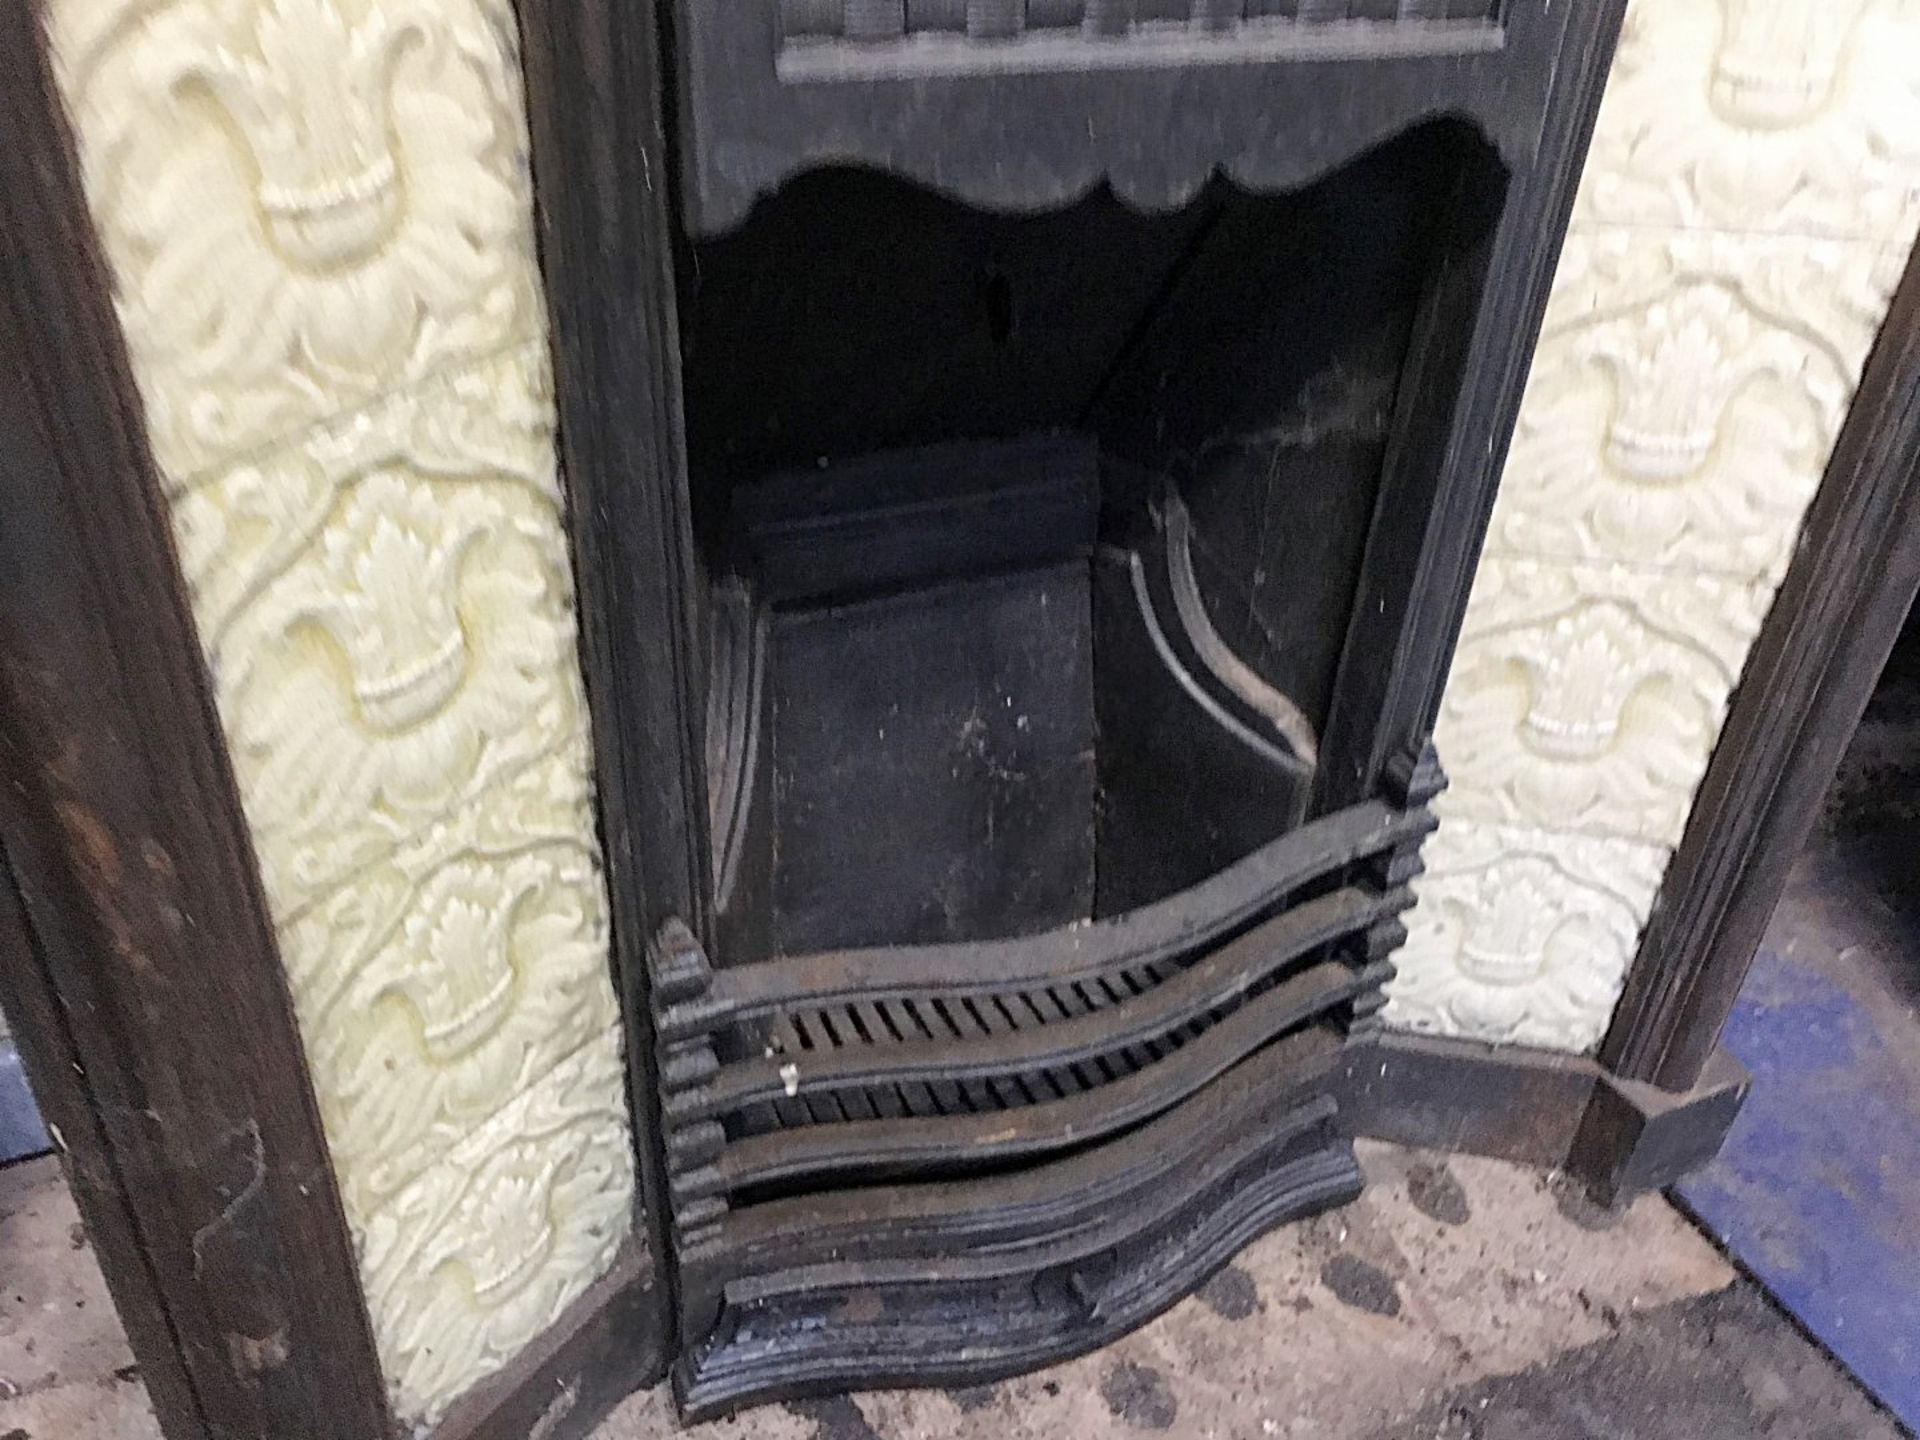 1 x Stunning Antique Victorian Cast Iron Fire Surround With Ornate Insert And Tiled Sides - - Image 8 of 8